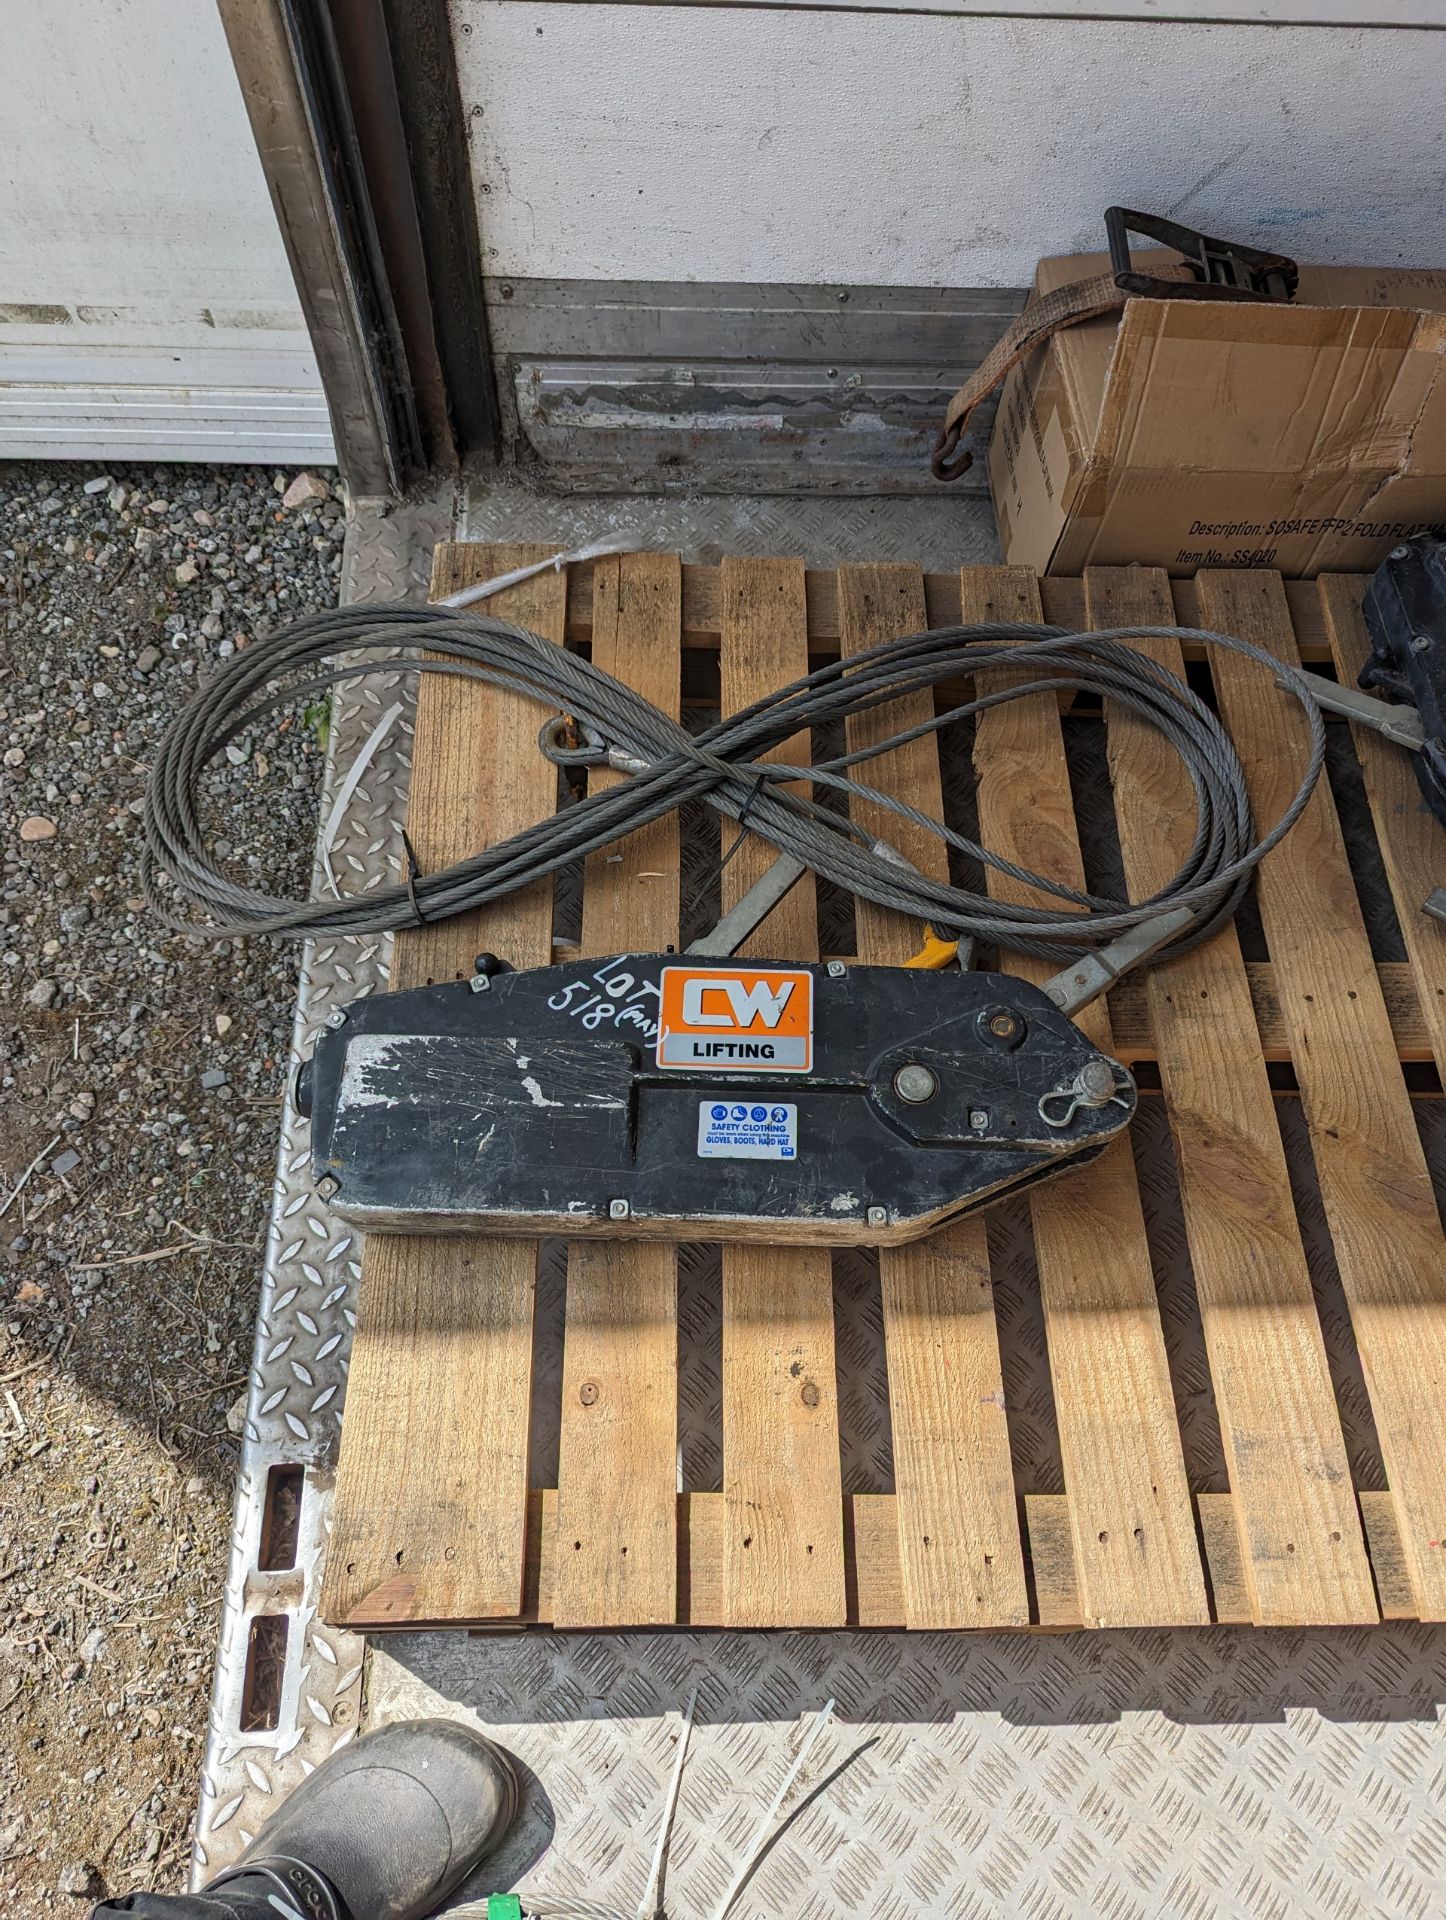 Tirfor Winch 3.2ton with approx 10m steel cable with hooks